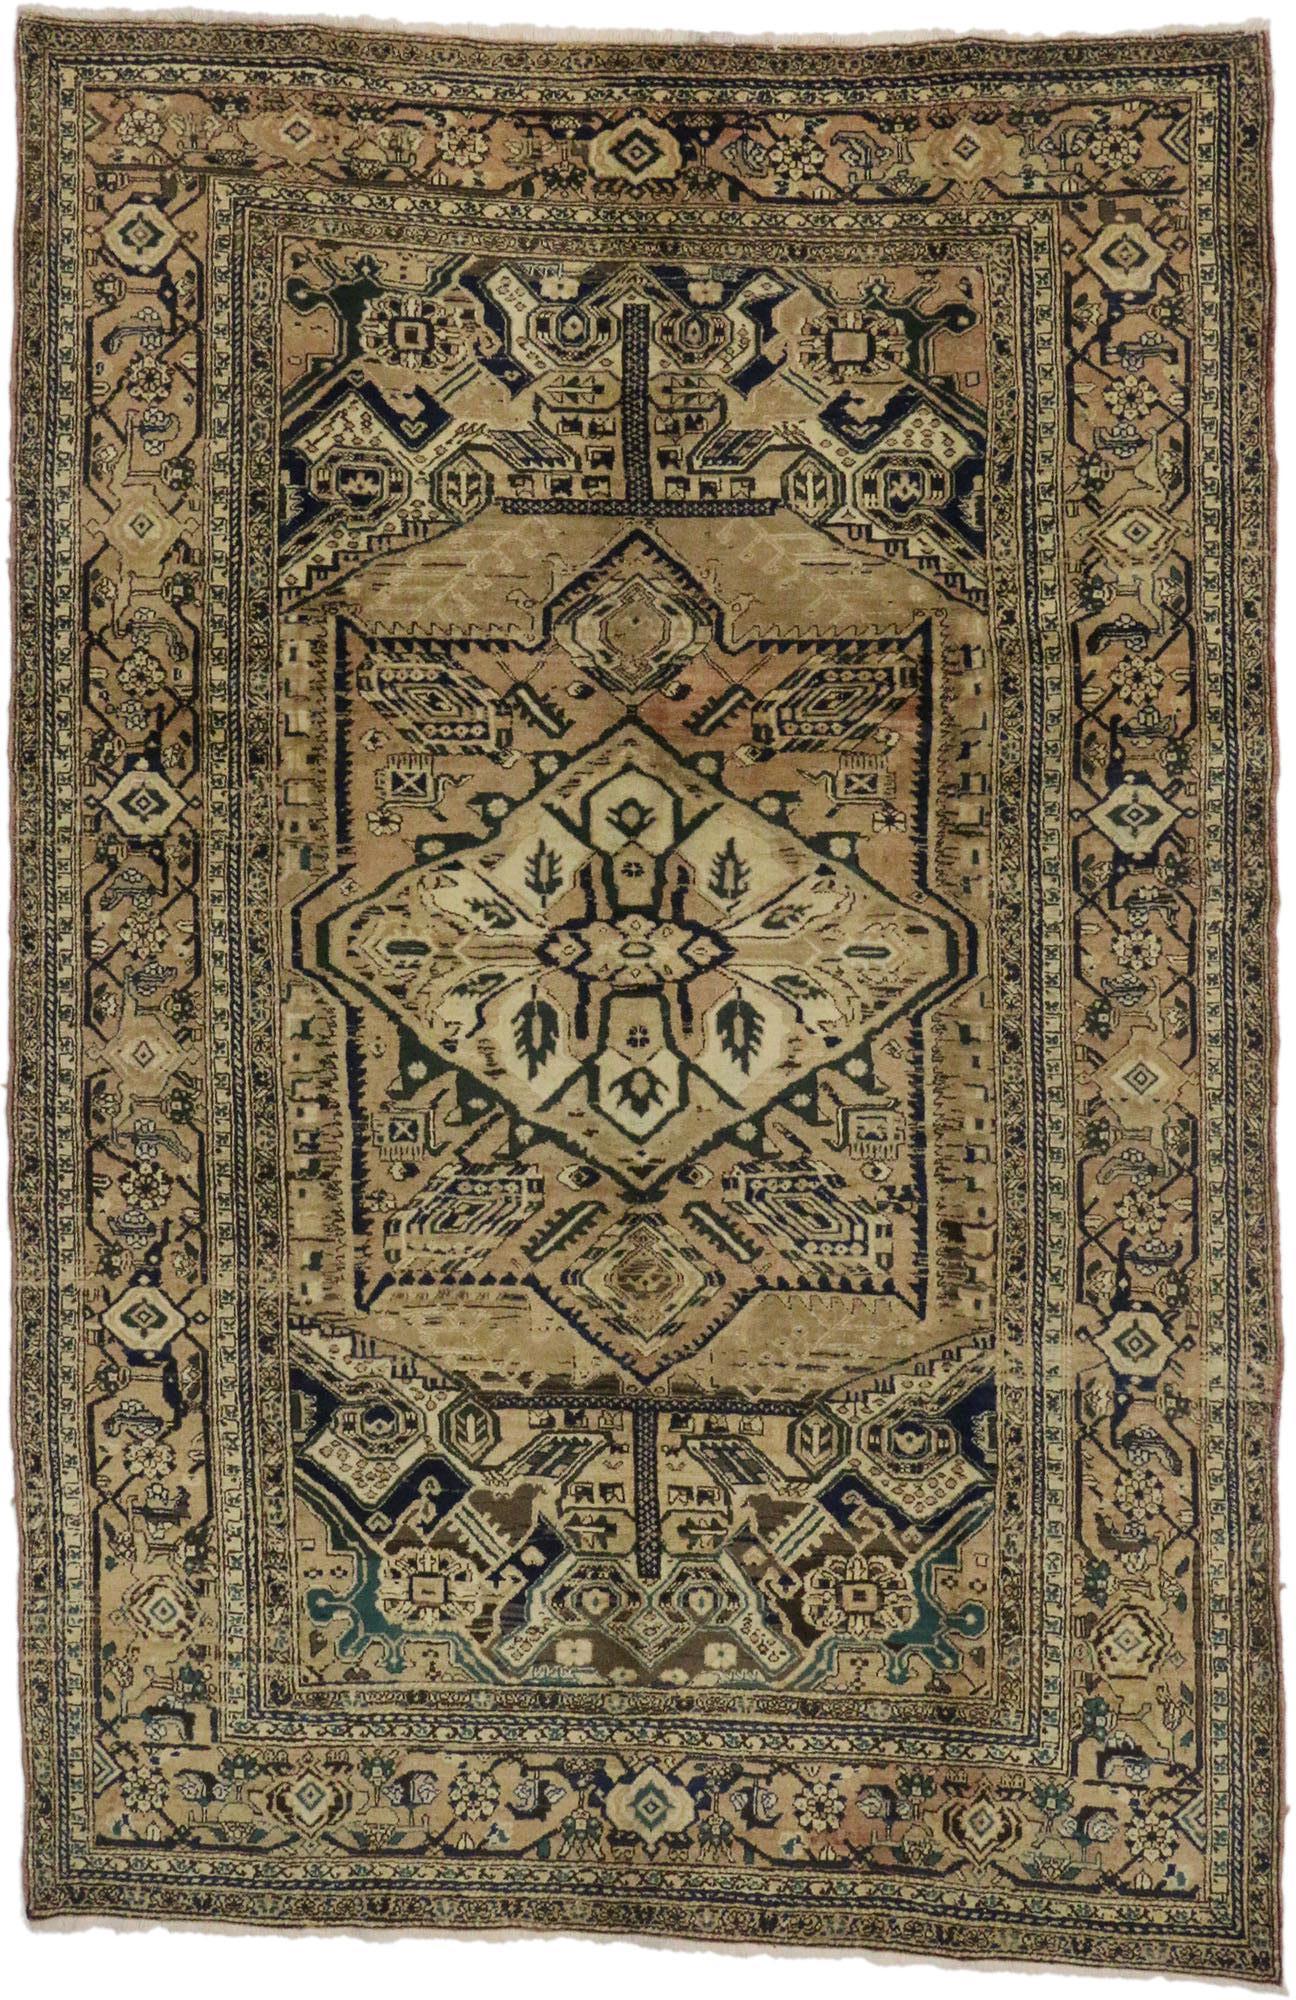 76591 Vintage Persian Heriz Rug with Modern Style 07'05 X 11'00. With appealing design aesthetic and a rare color palette after the antique wash, this hand-knotted wool vintage Persian Heriz rug is poised to impress. The warm camel colored field